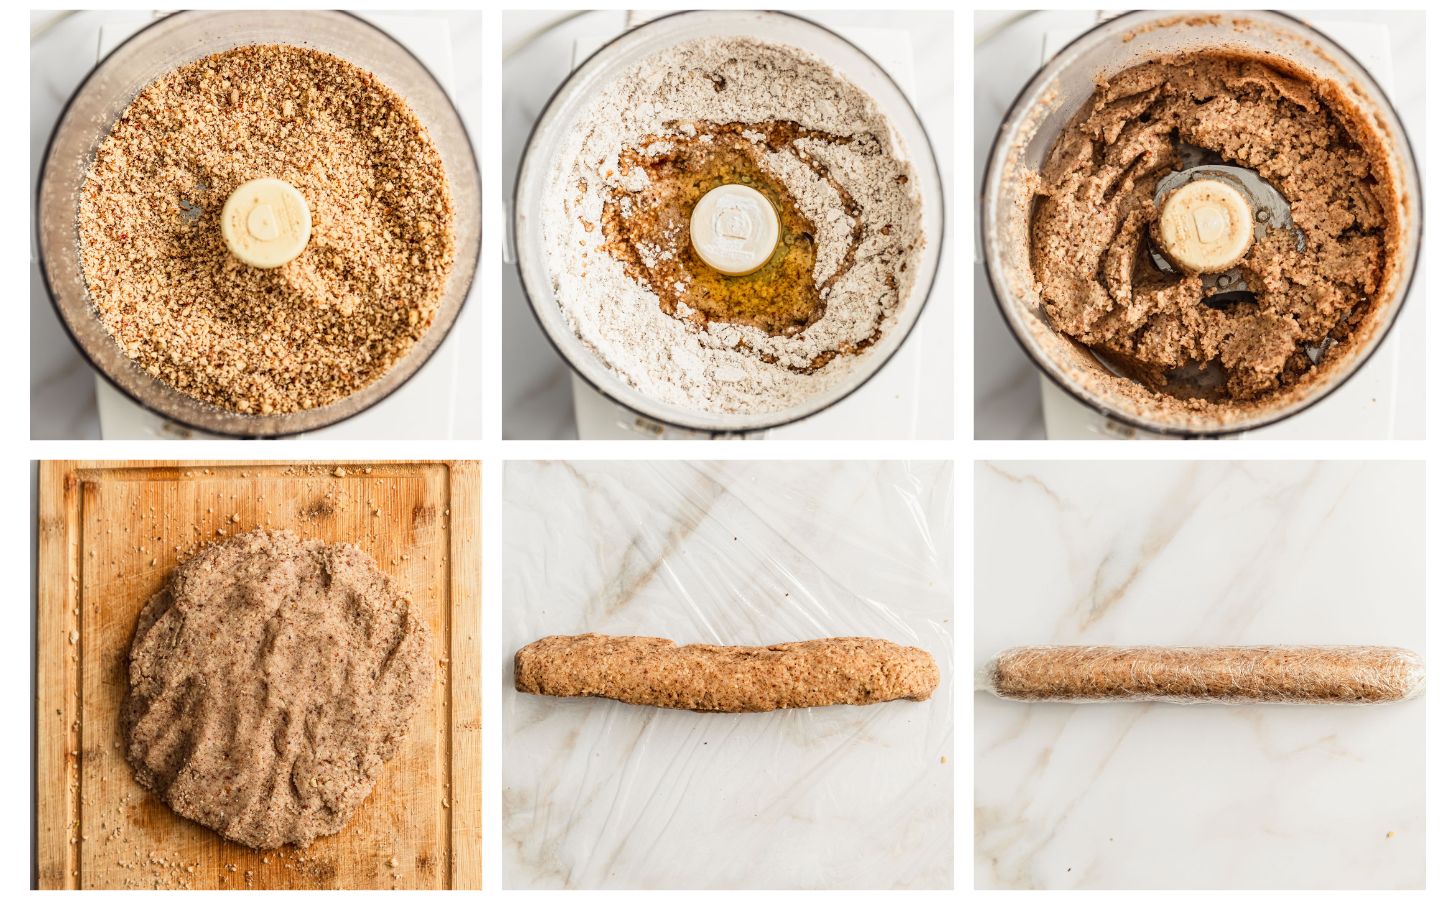 Six steps to making hazelnut marzipan. In photo 1, hazelnut flour in a food processor. In photo 2, the food processor has powdered sugar, an egg white, and vanilla. In photo 3, the marzipan is mixed. In photo 4, the marzipan is kneaded on a wood board. In photo 5, the marzipan is shaped into a log. In photo 6, the marzipan is wrapped.